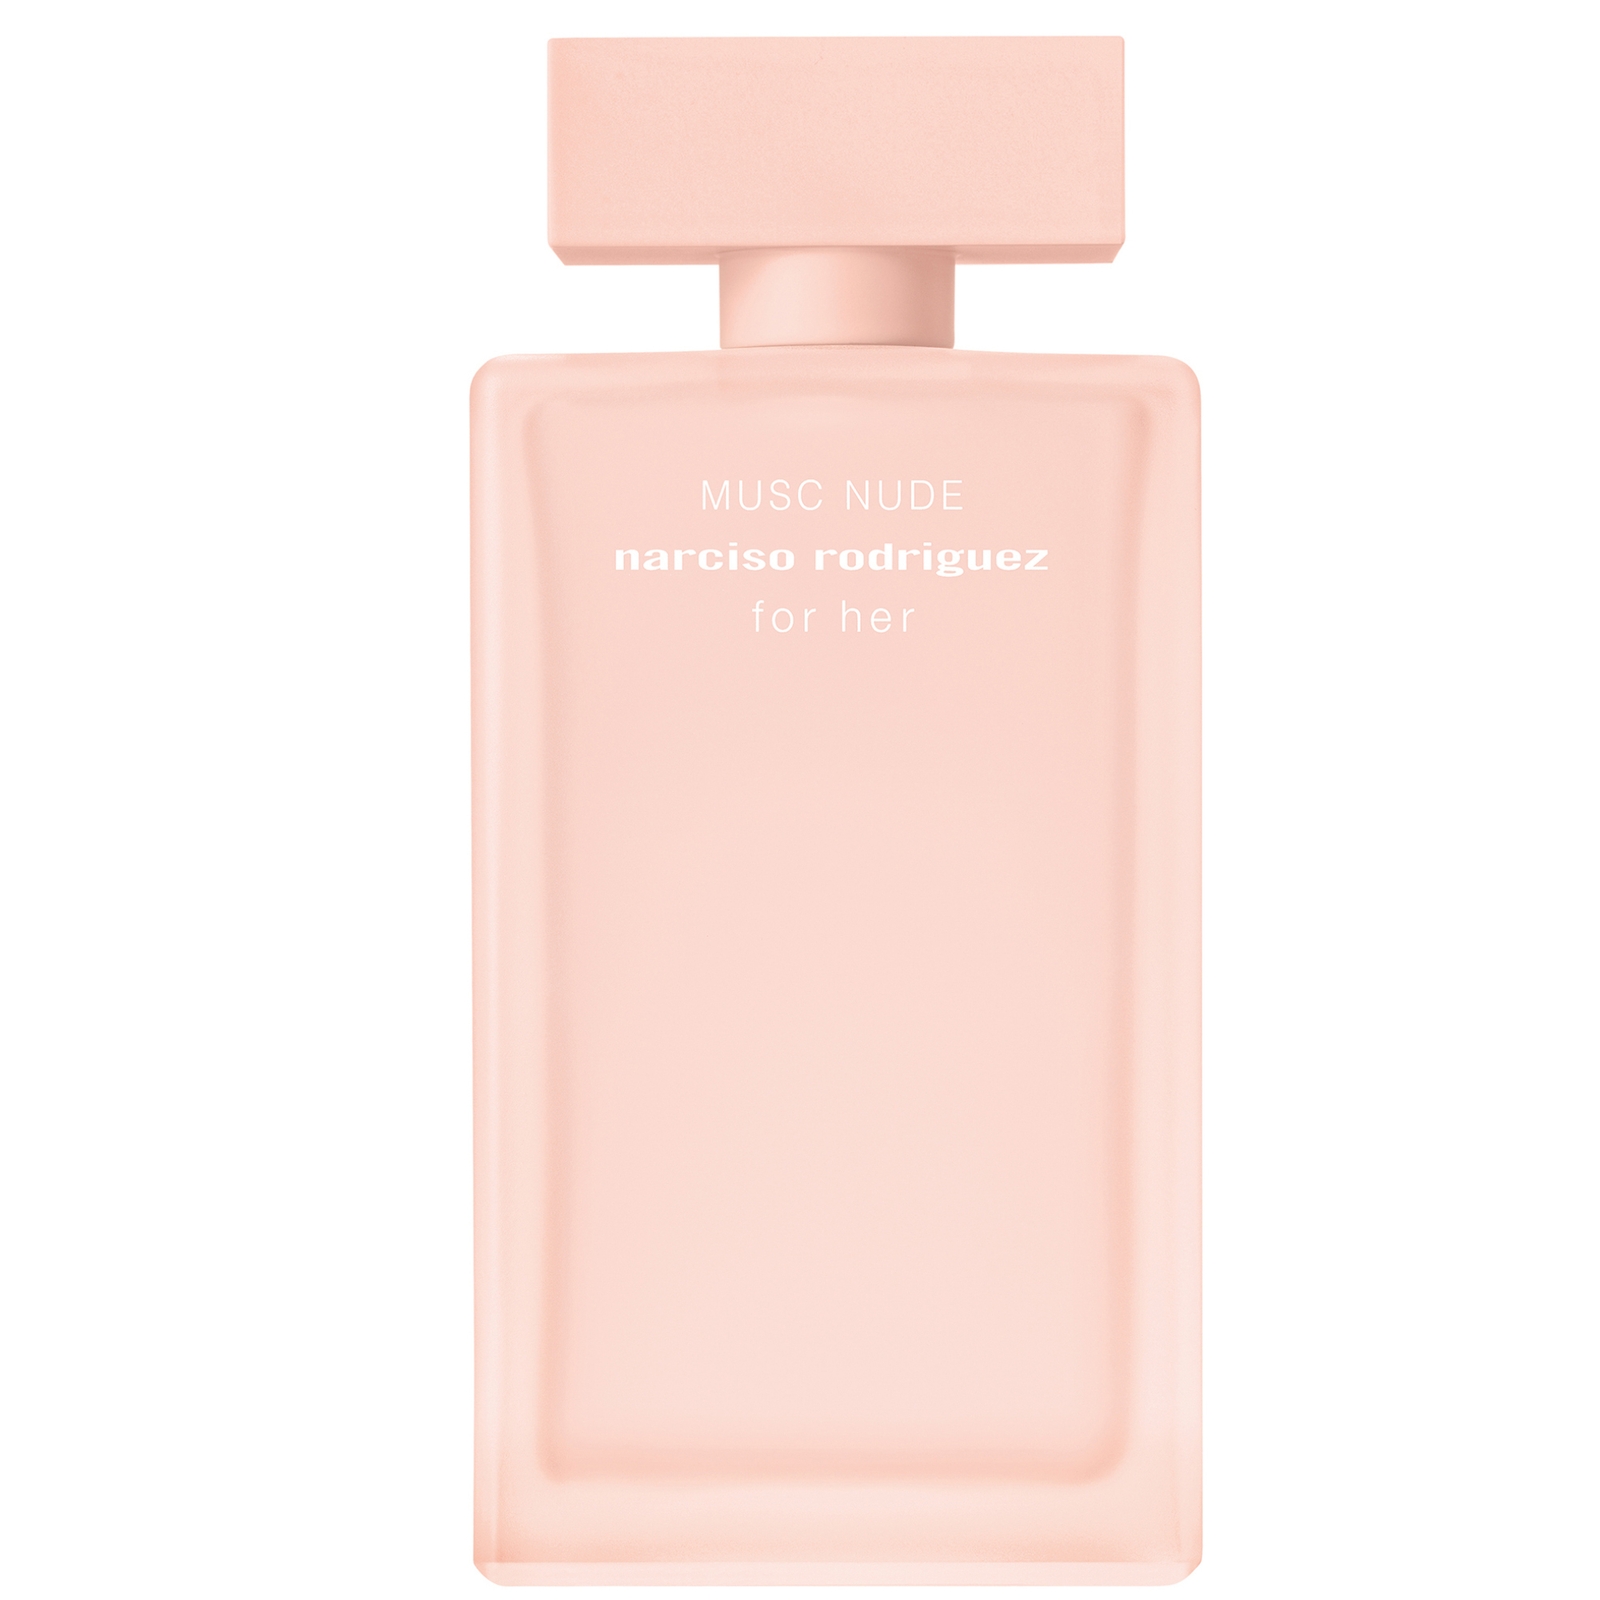 Image of Narciso Rodriguez for Her Musc Nude Eau de Parfum 100ml